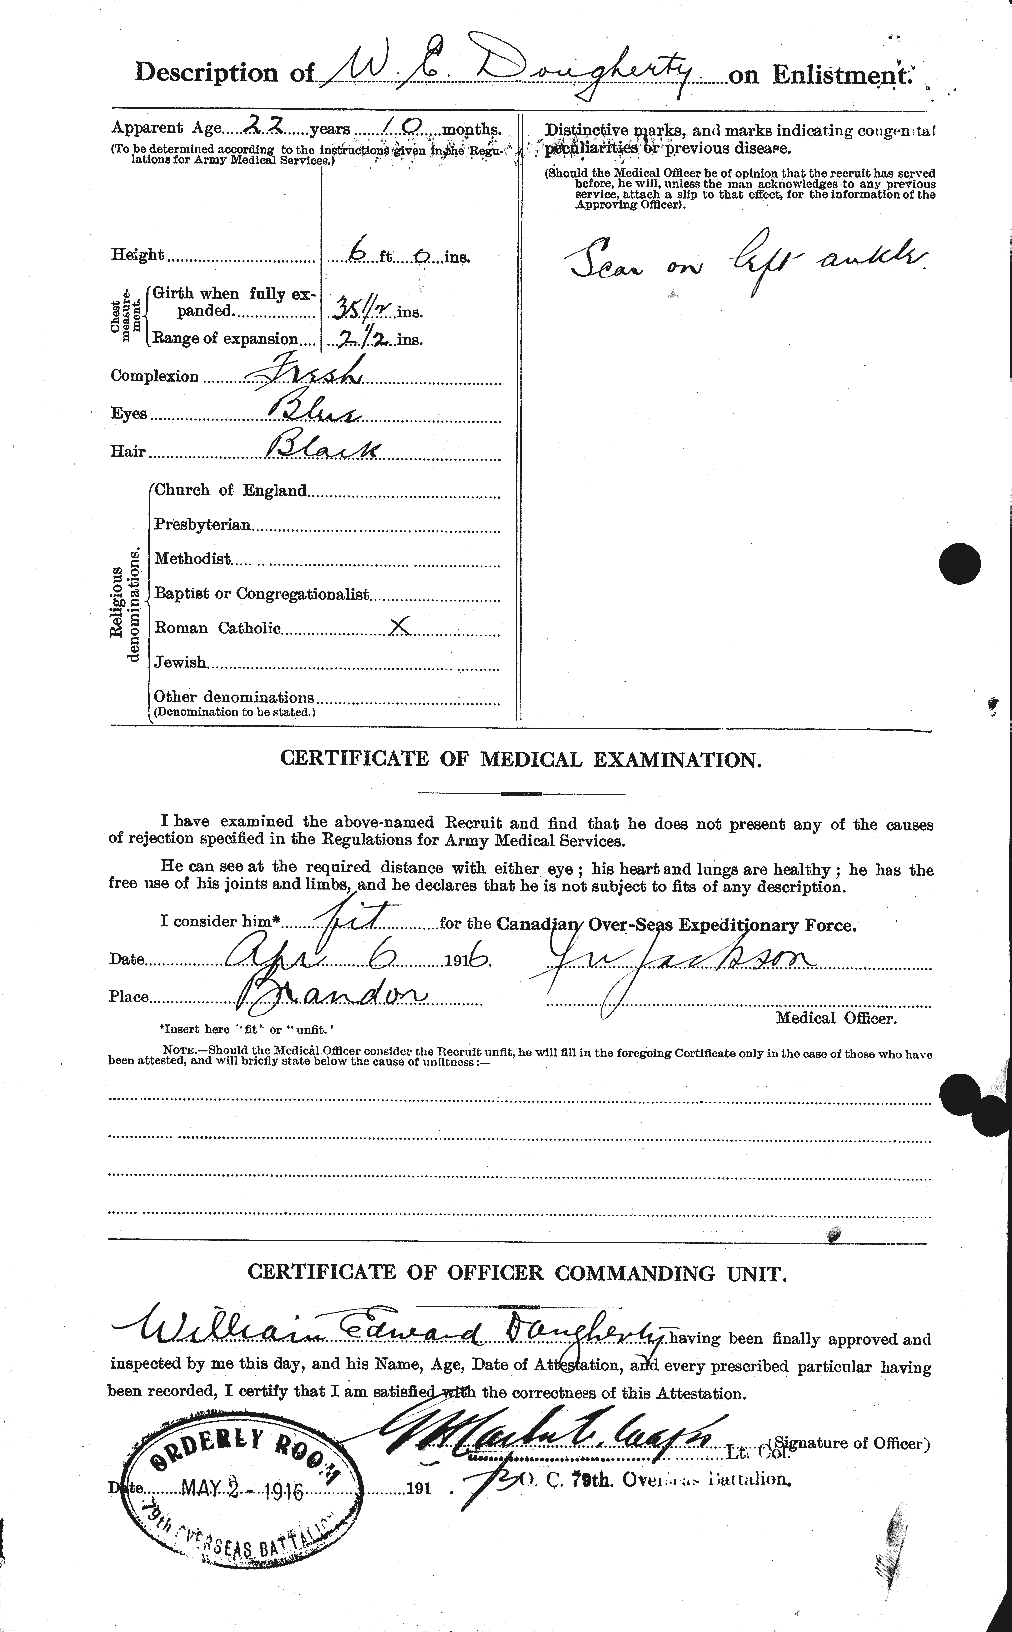 Personnel Records of the First World War - CEF 296188b